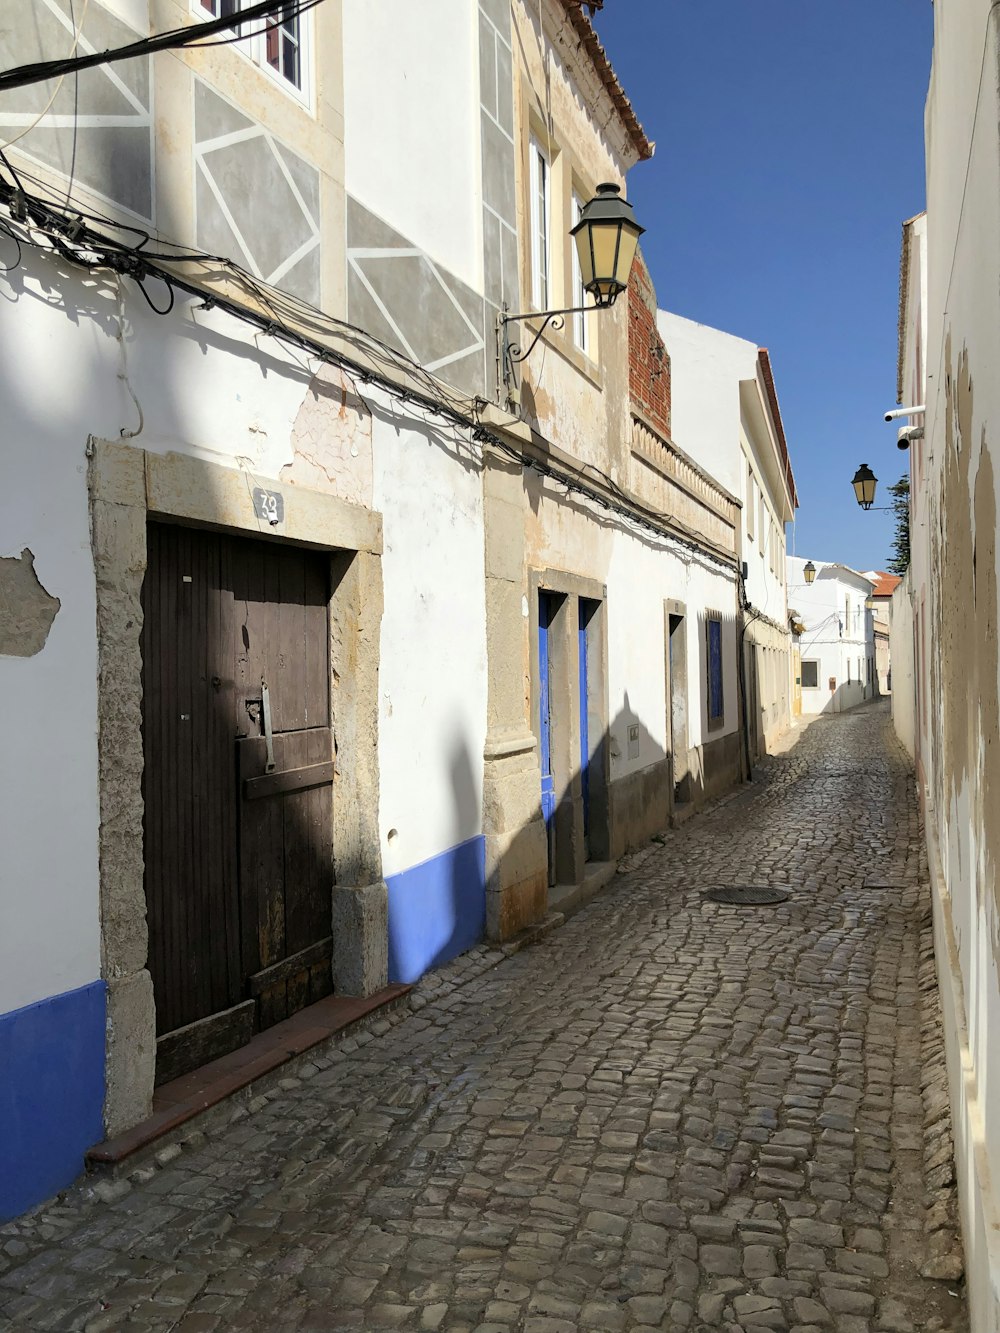 empty hallway surrounded by houses under blue sky